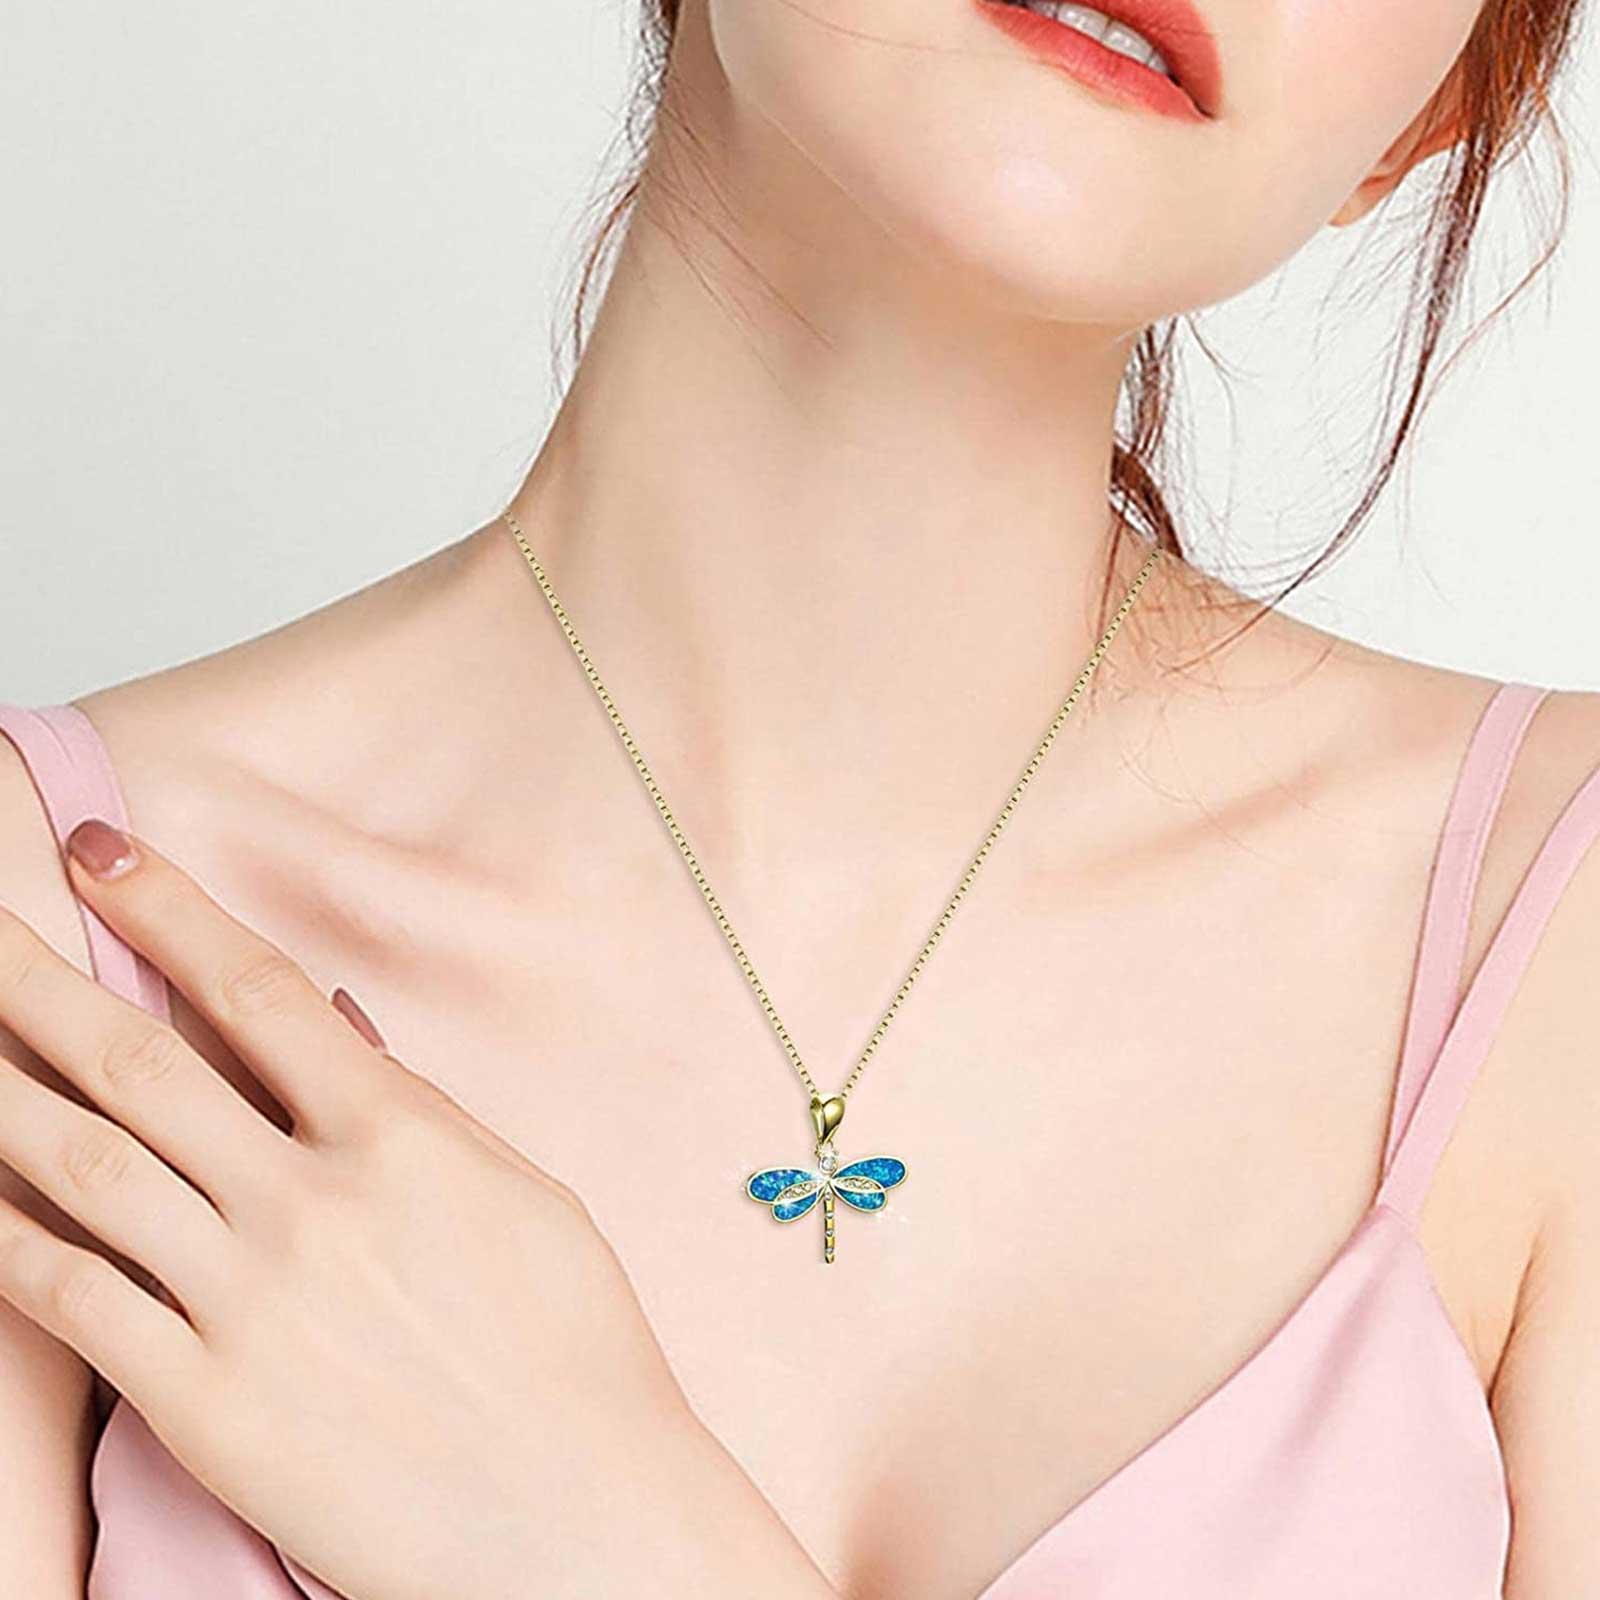 Dragonfly Necklace Pendant Choker For Women Girls White Gold Blue Silver Y5G3 - image 5 of 9